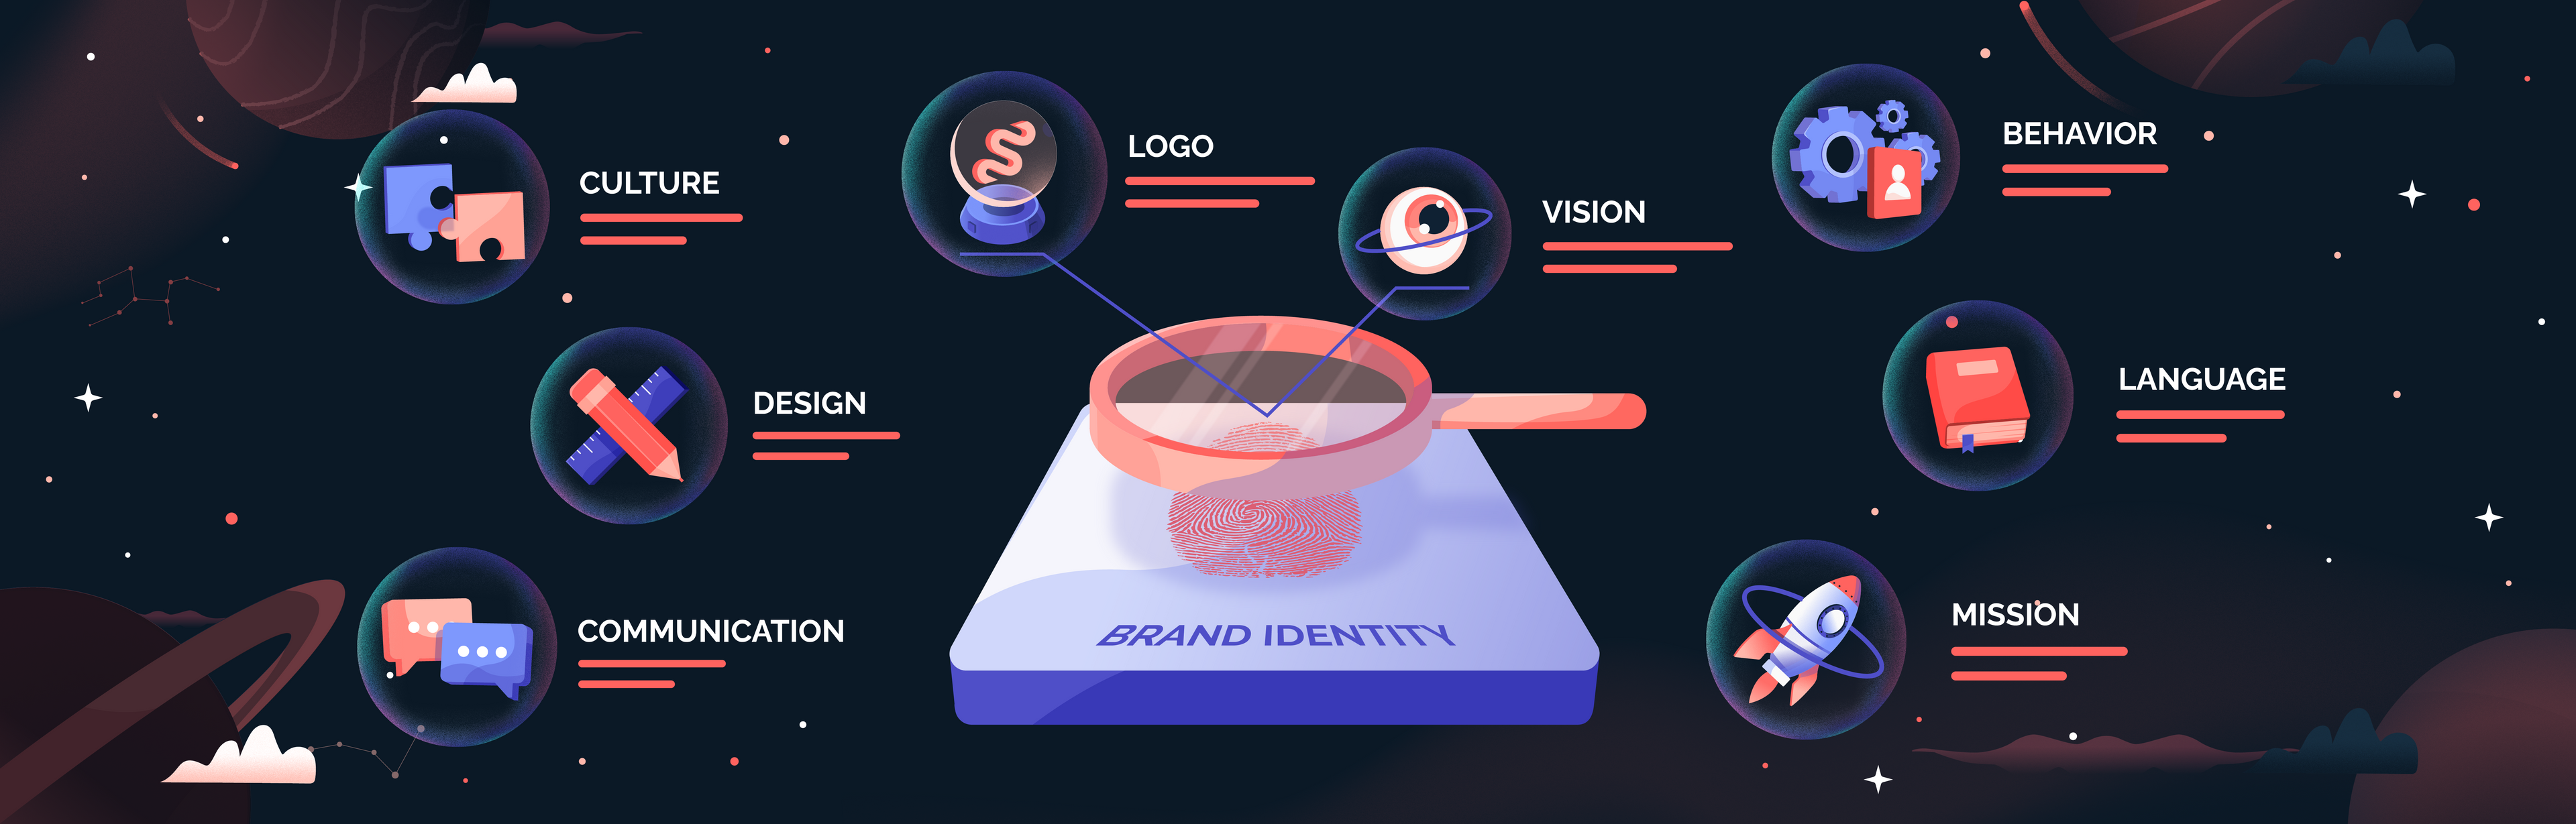 Brand Identity Examples, Elements, Tips And Tricks